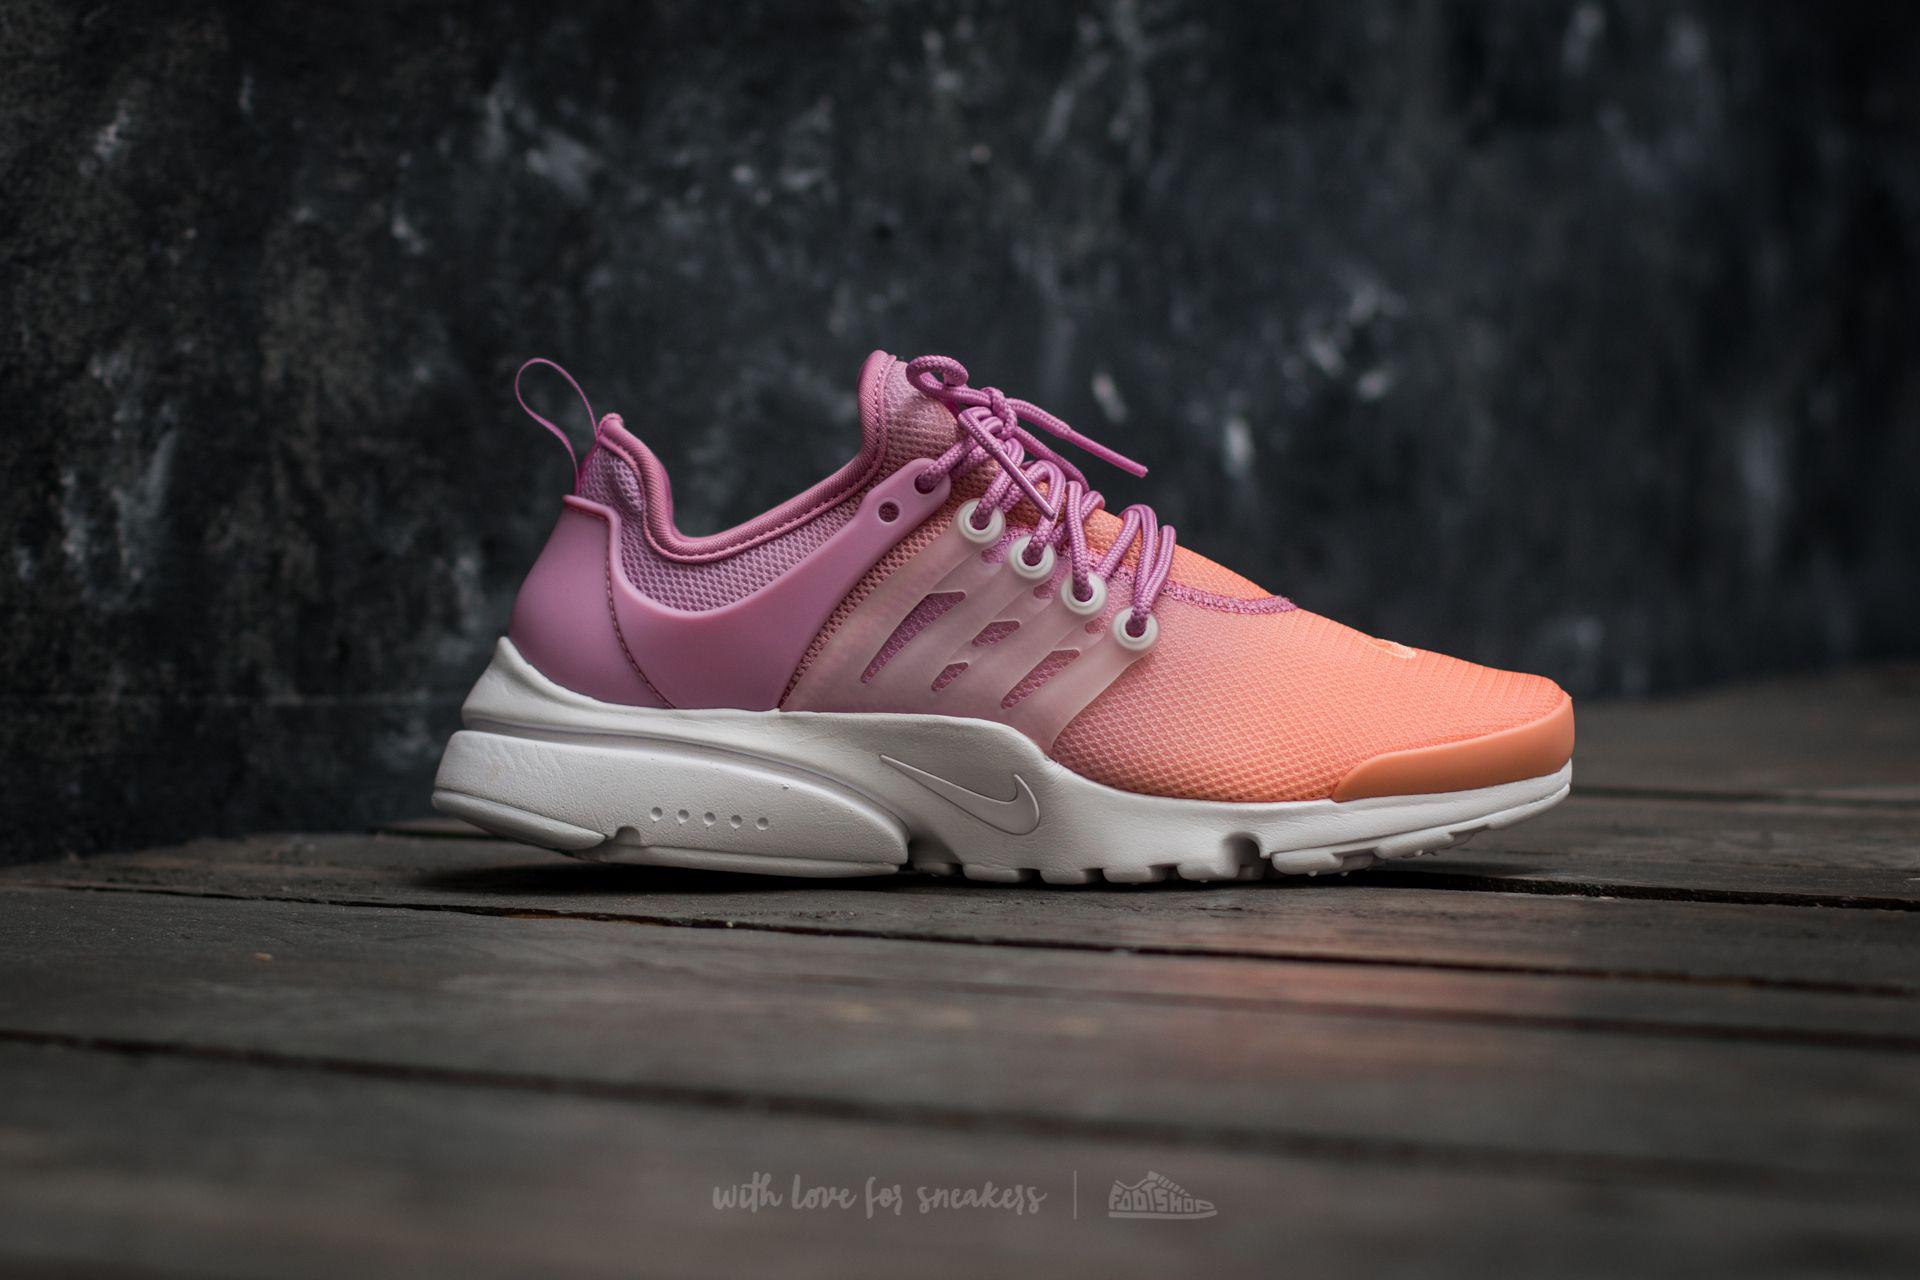 Nike Wmns Air Presto Ultra Br Sunset Glow/ White Orchid - Lyst